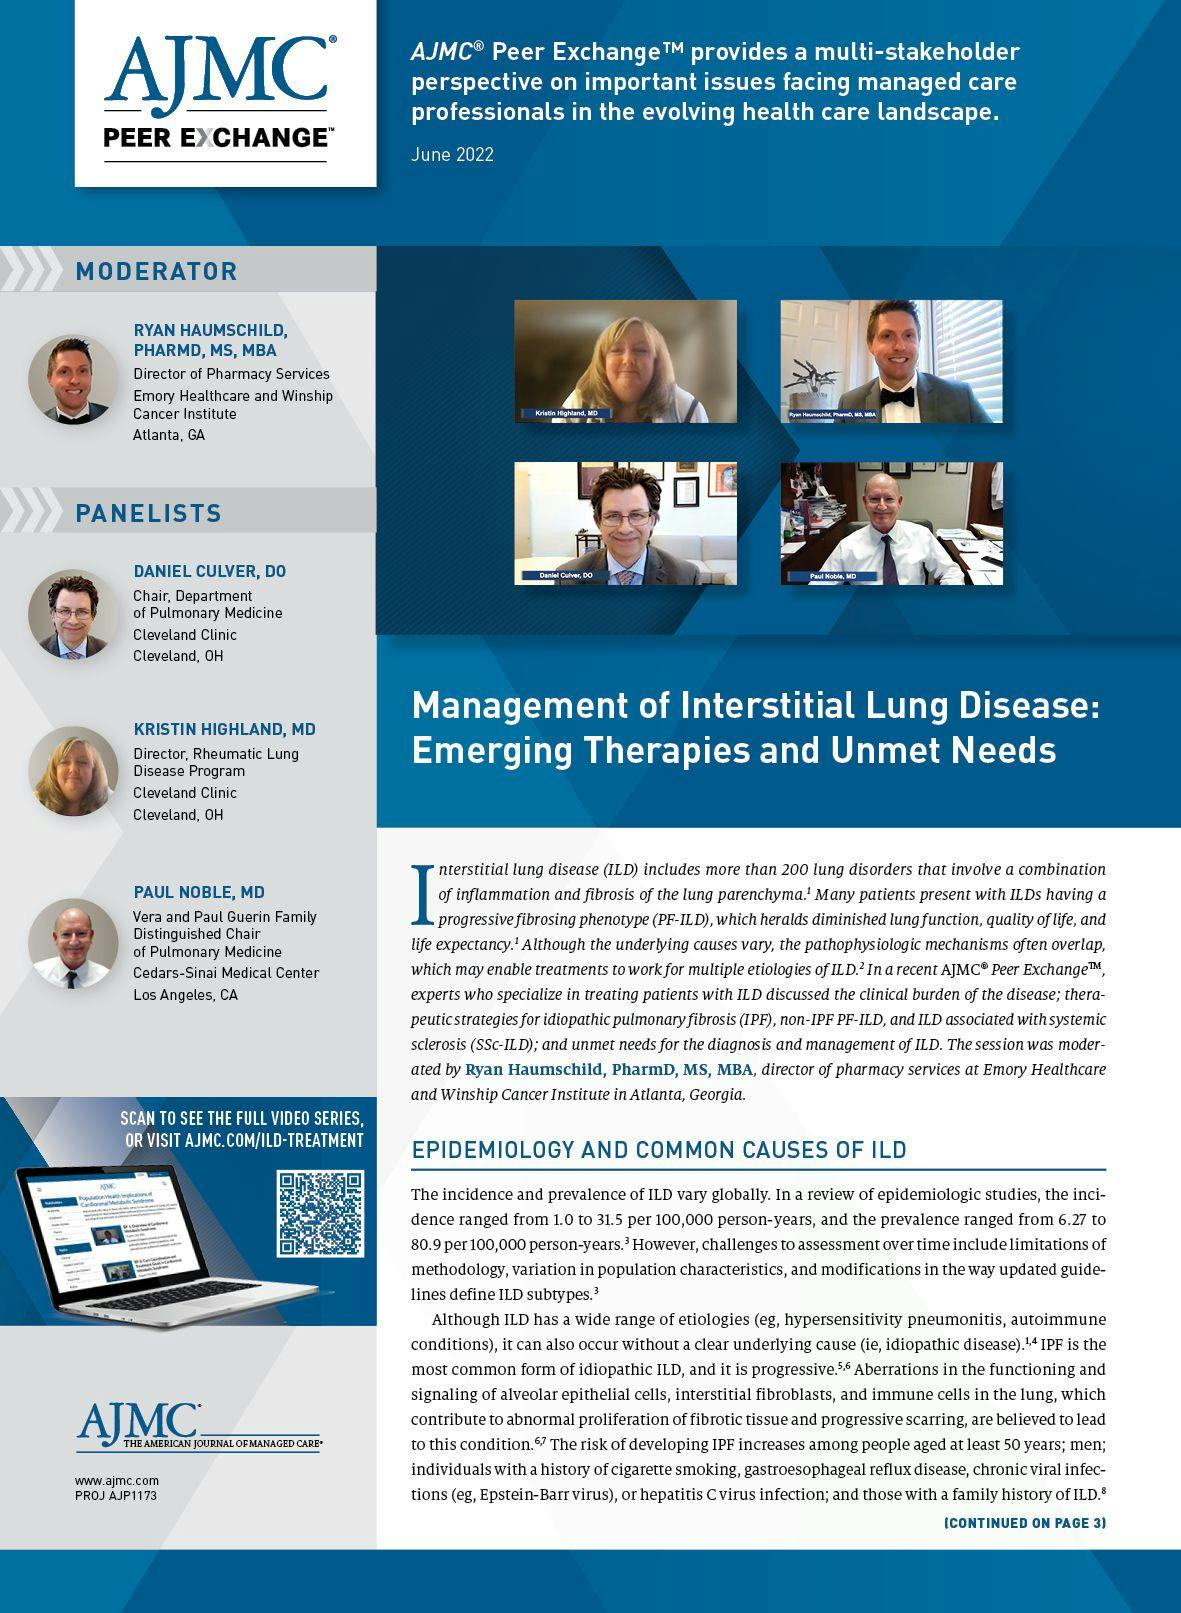 Management of Interstitial Lung Disease: Emerging Therapies and Unmet Needs